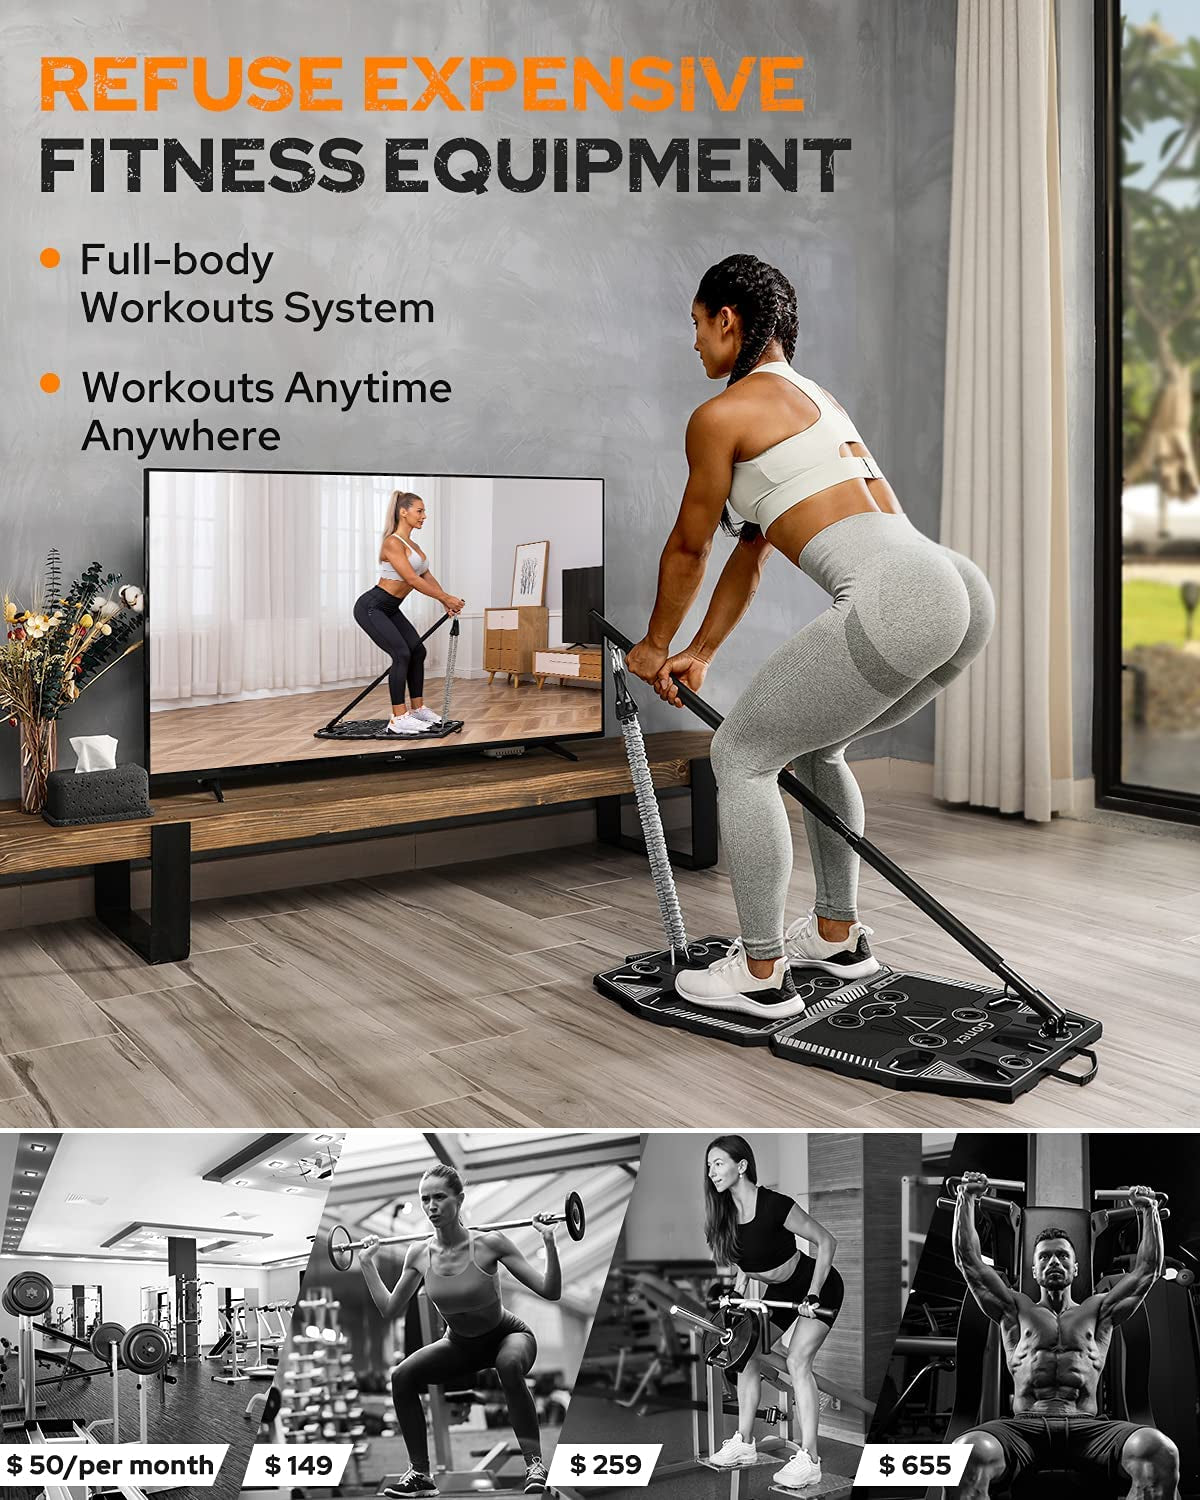 Portable Home Gym Workout Equipment with 14 Exercise Accessories Ab Roller Wheel,Elastic Resistance Bands,Push-Up Stand,Post Landmine Sleeve and More for Full Body Workouts System